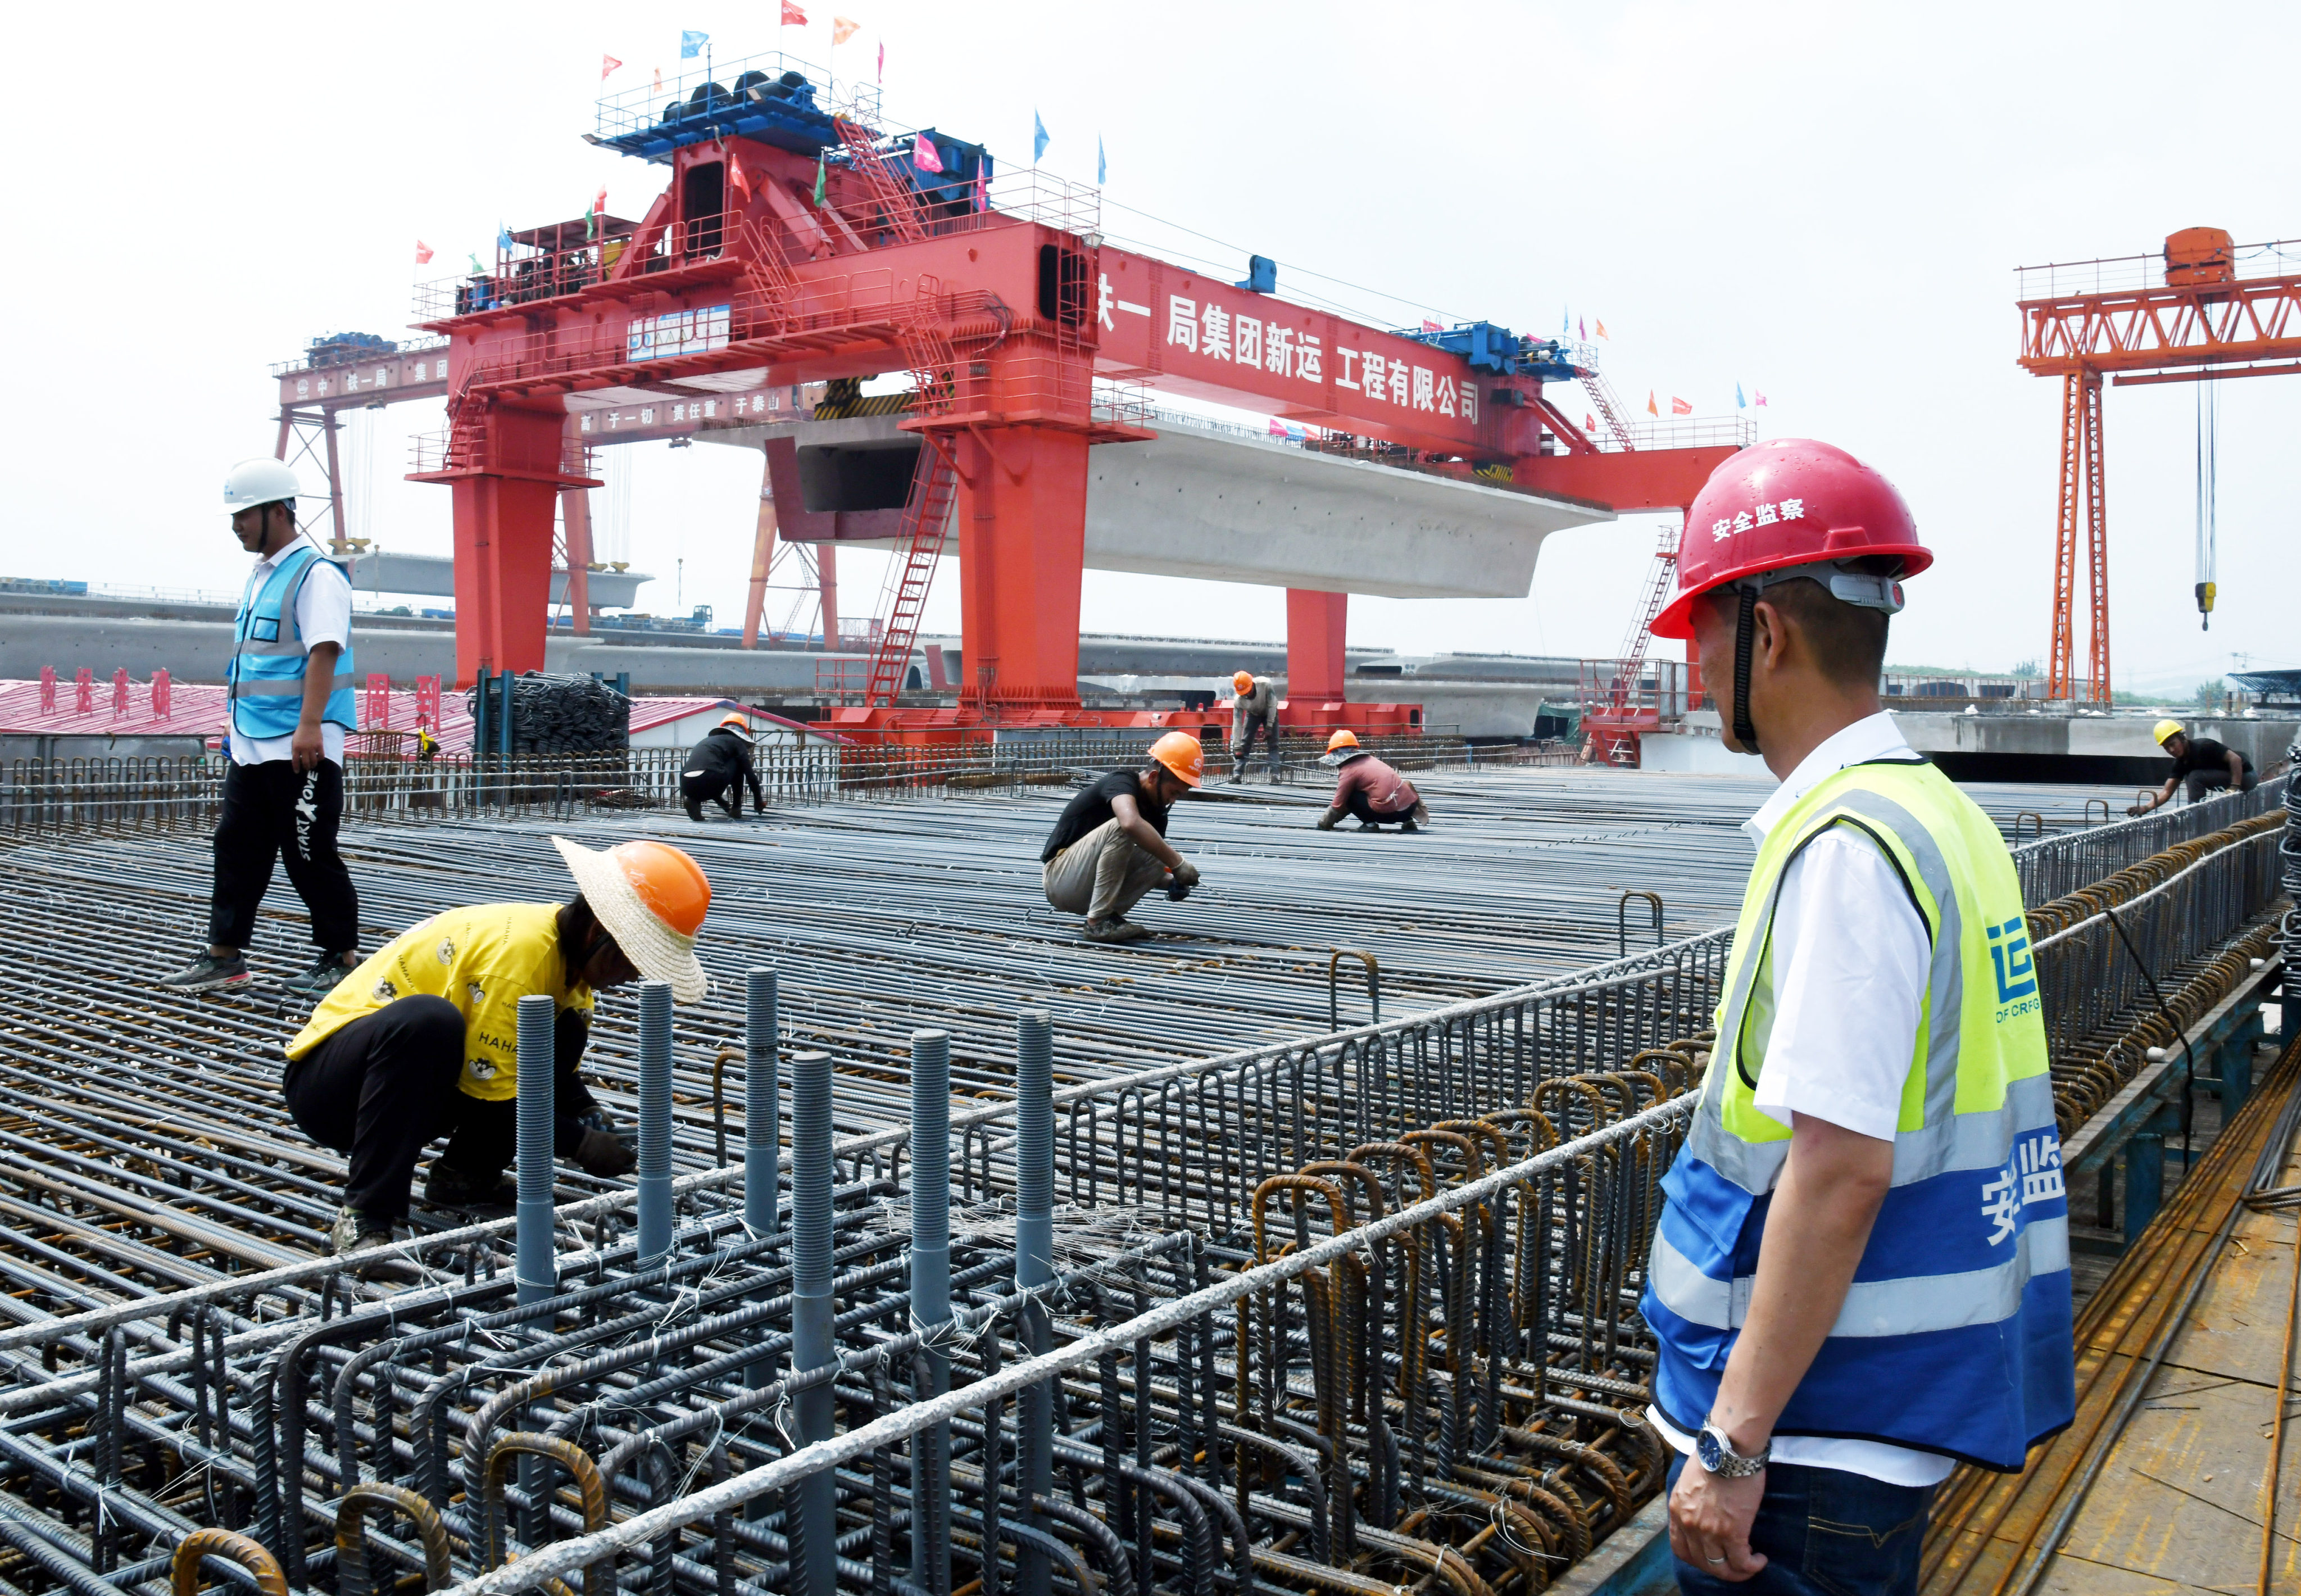 One of the world’s top makers of construction machinery has released figures pointing to a potential slowdown in Chinese infrastructure projects. Photo: Xinhua